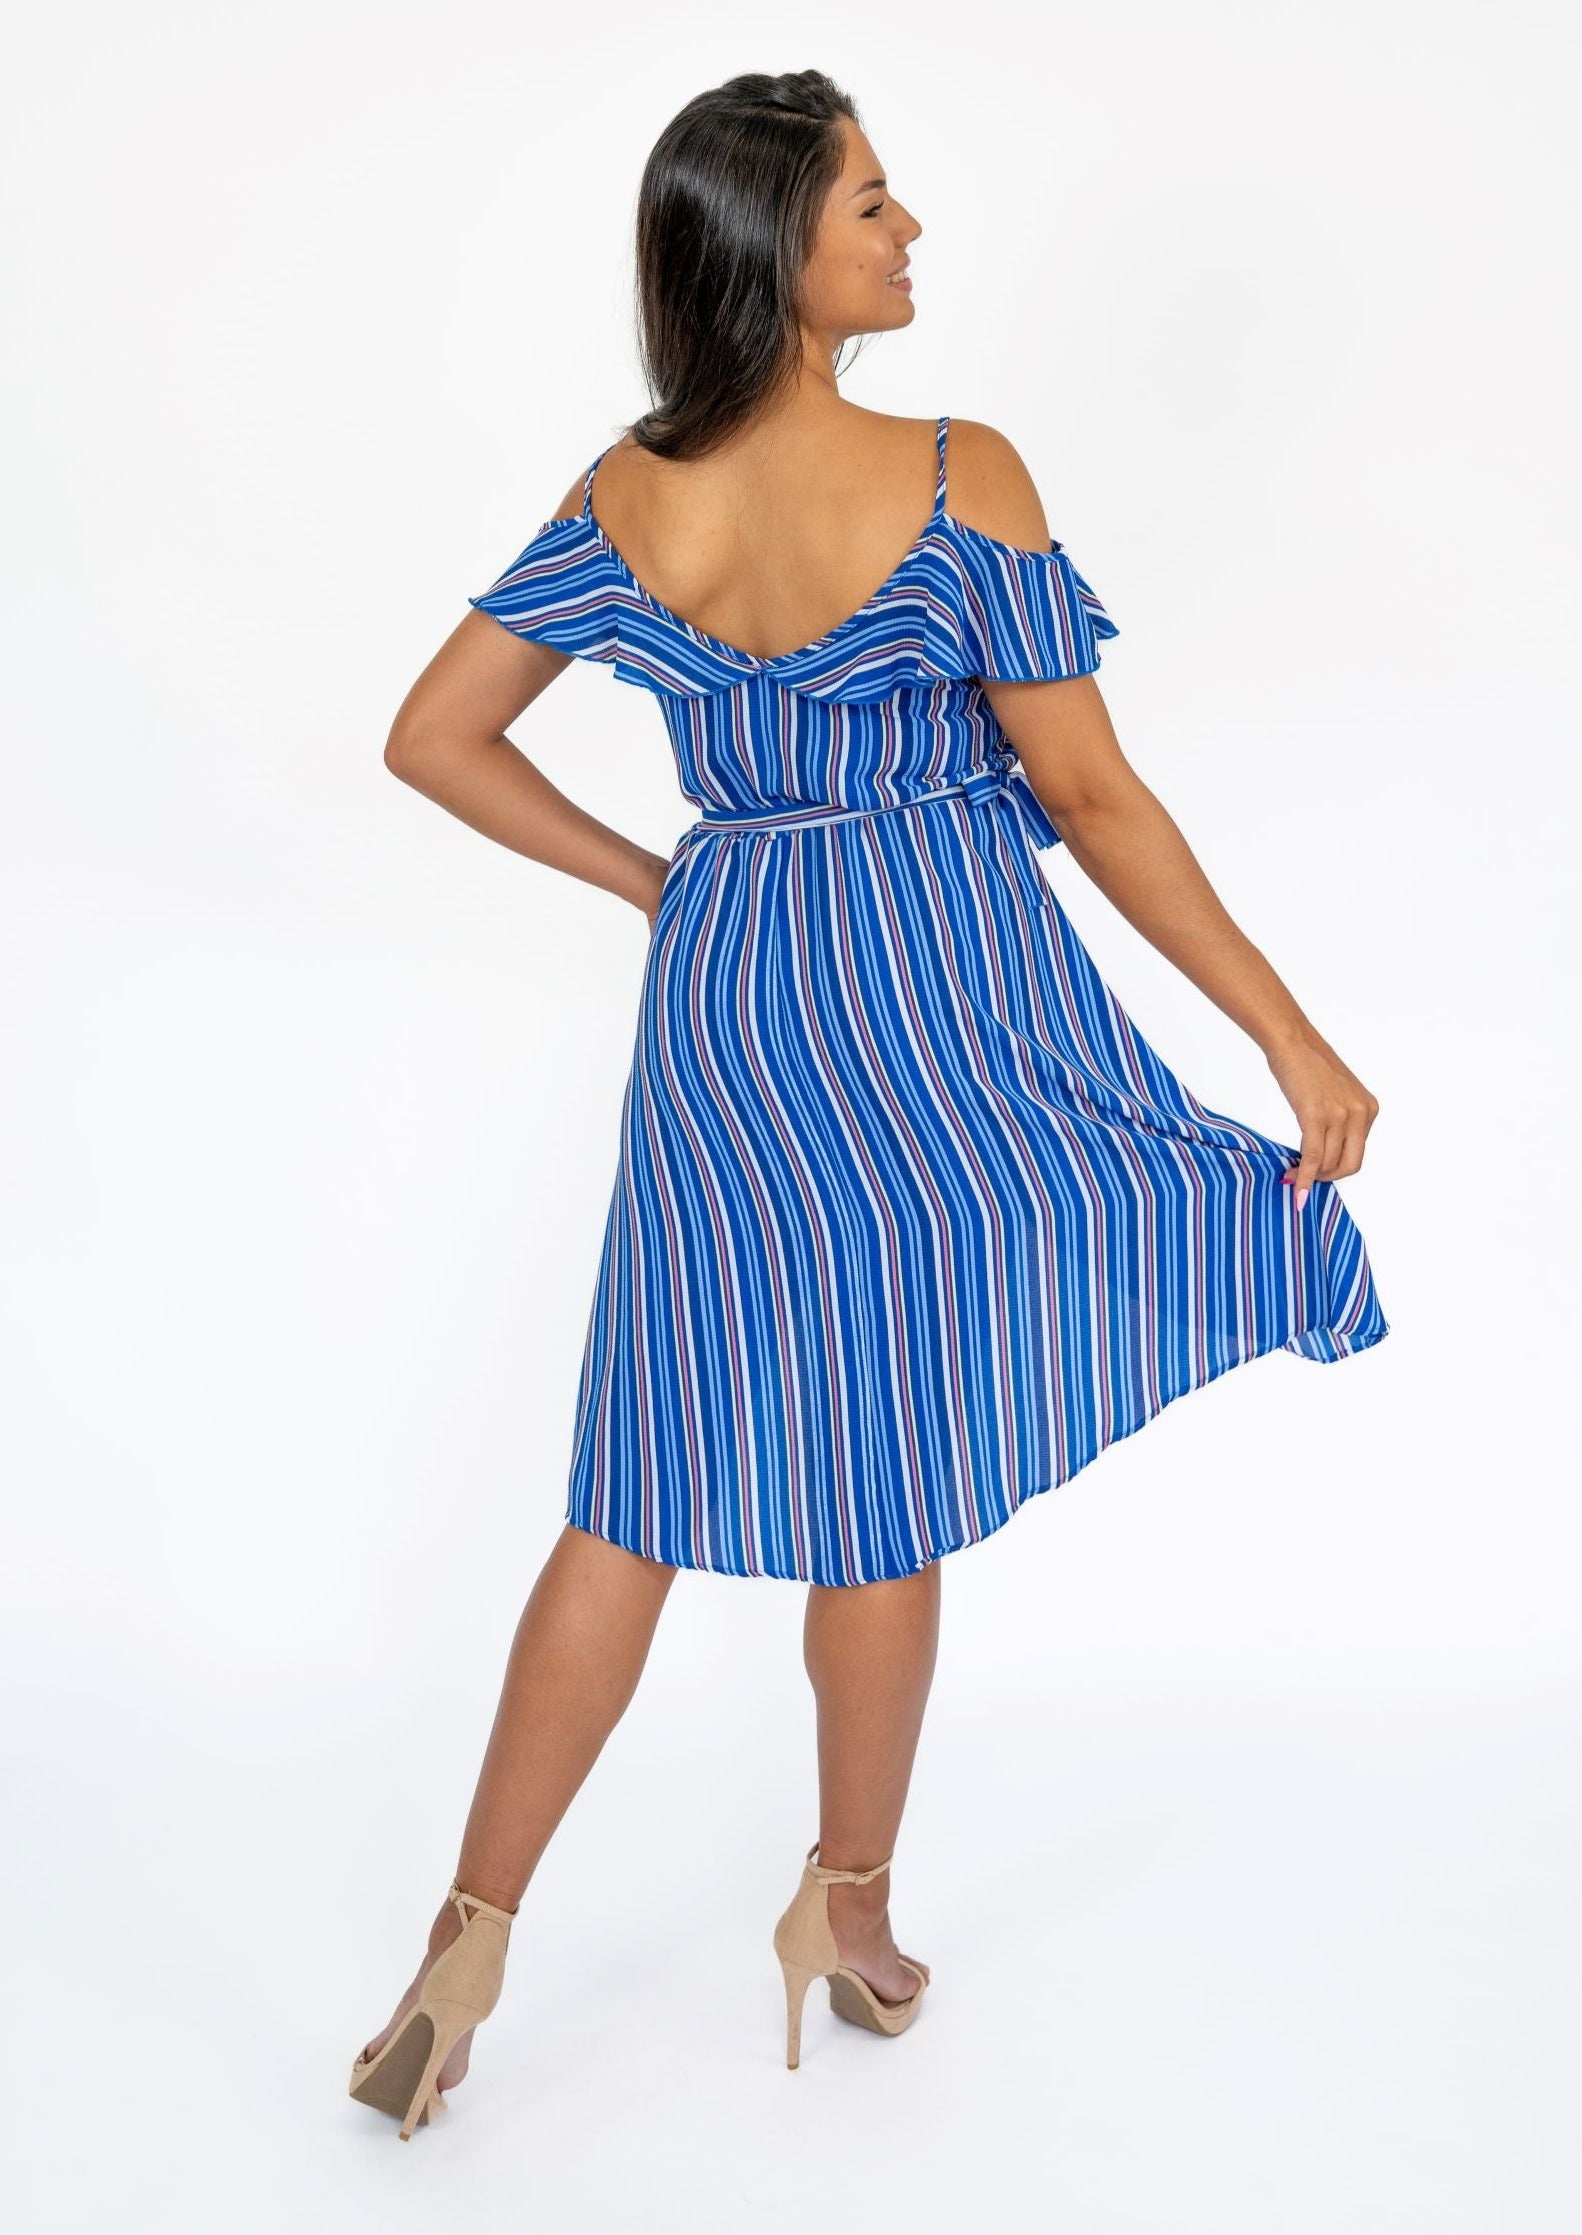 Women's Stripped Blue, White and Yellow Spring Dress